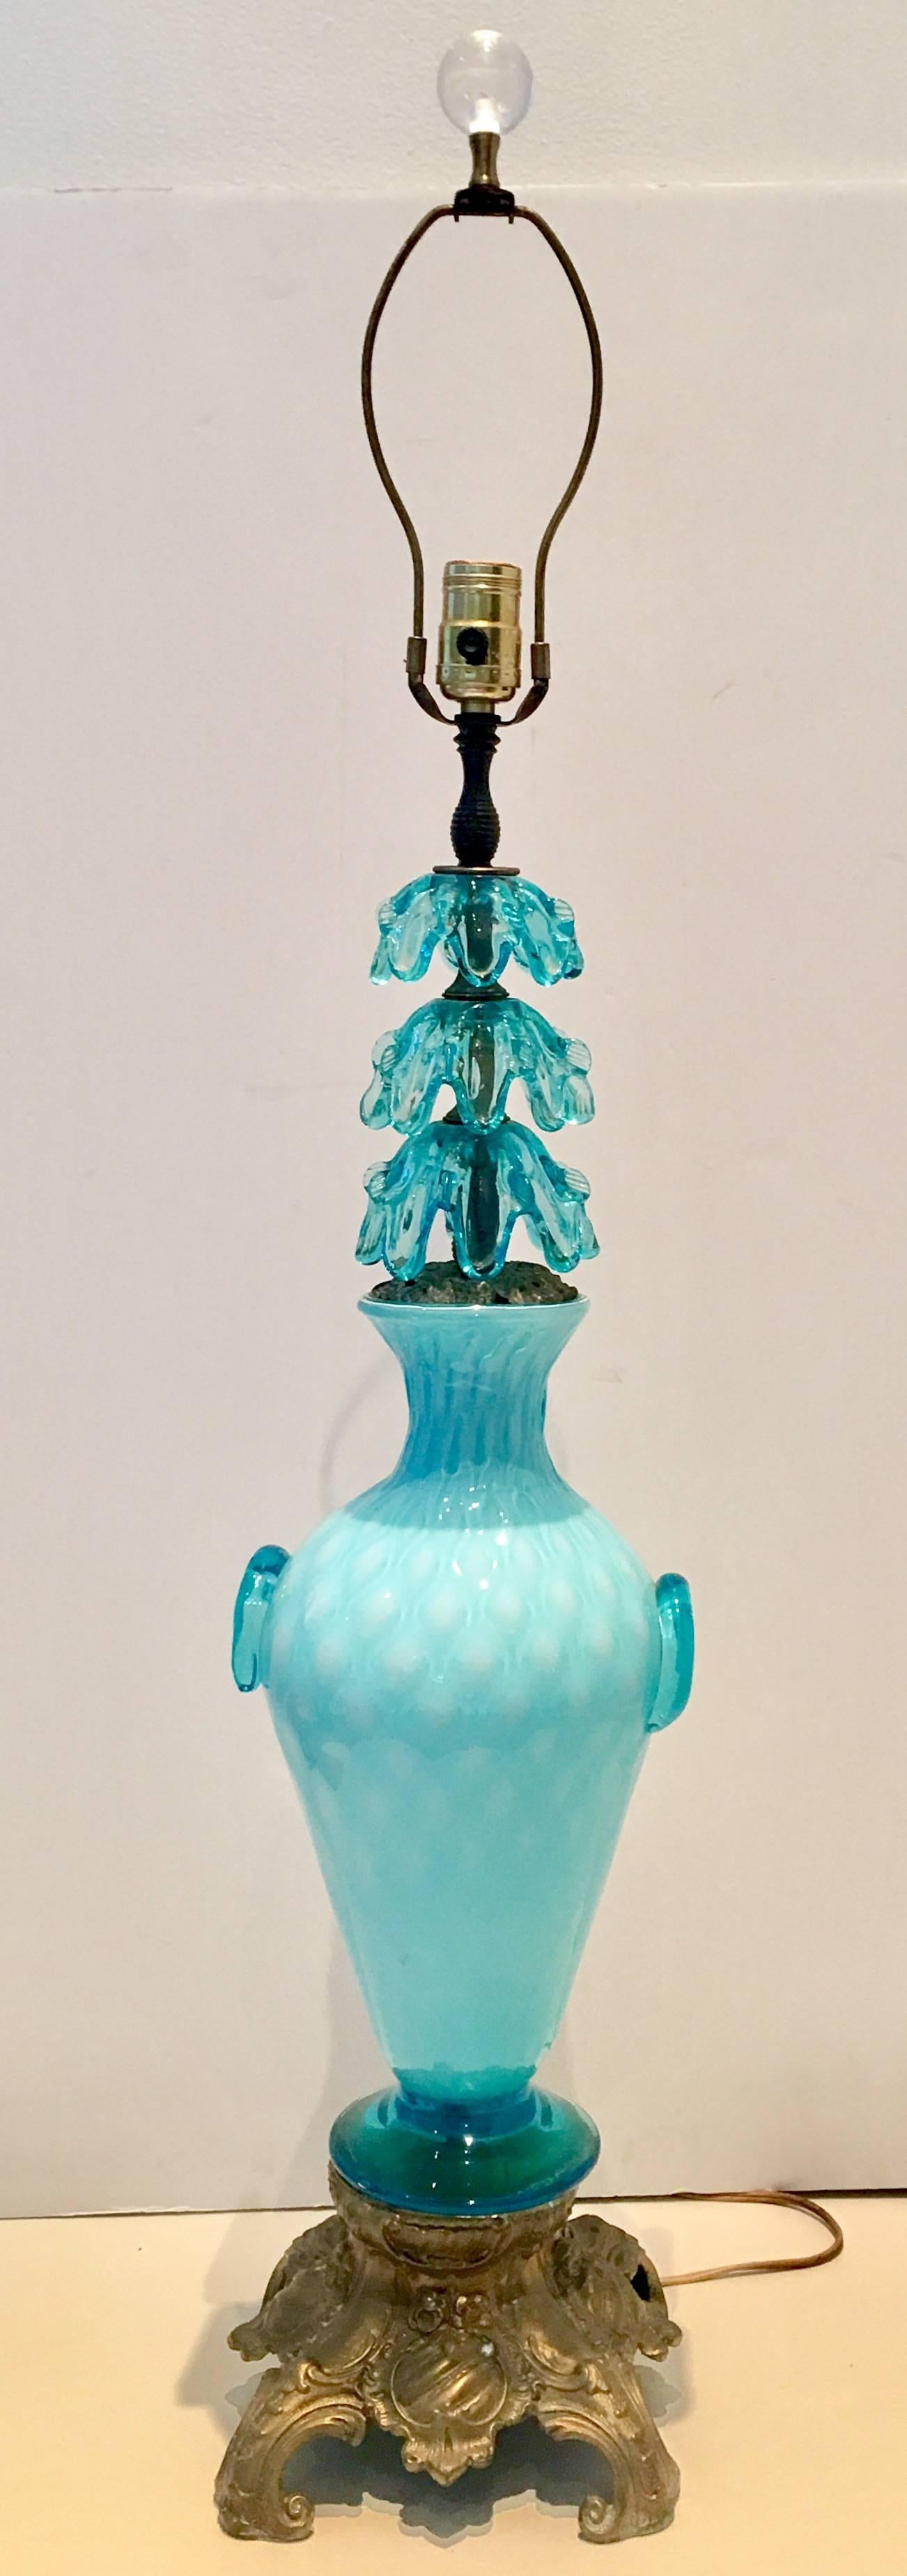 Mid-Century custom-made Murano glass lamp in robins egg blue and white. Features an applied two handle urn style vase body with applied ribbon detail at the neck. The body of the vase is opaline and quilted. The base and neck mounts are bronze.